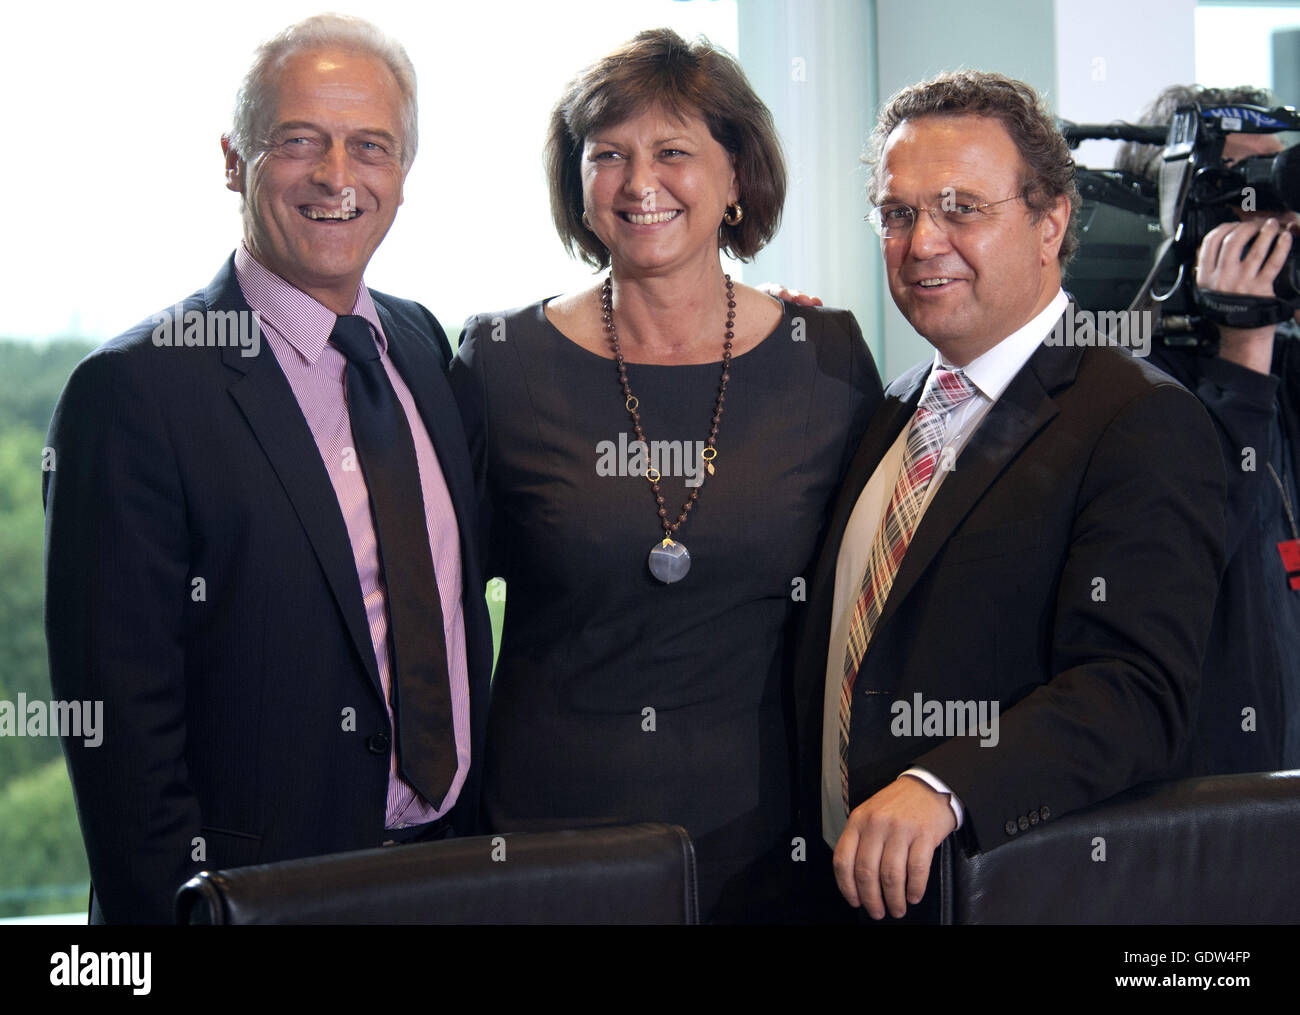 Federal minister ilse aigner hi-res stock photography and images - Alamy